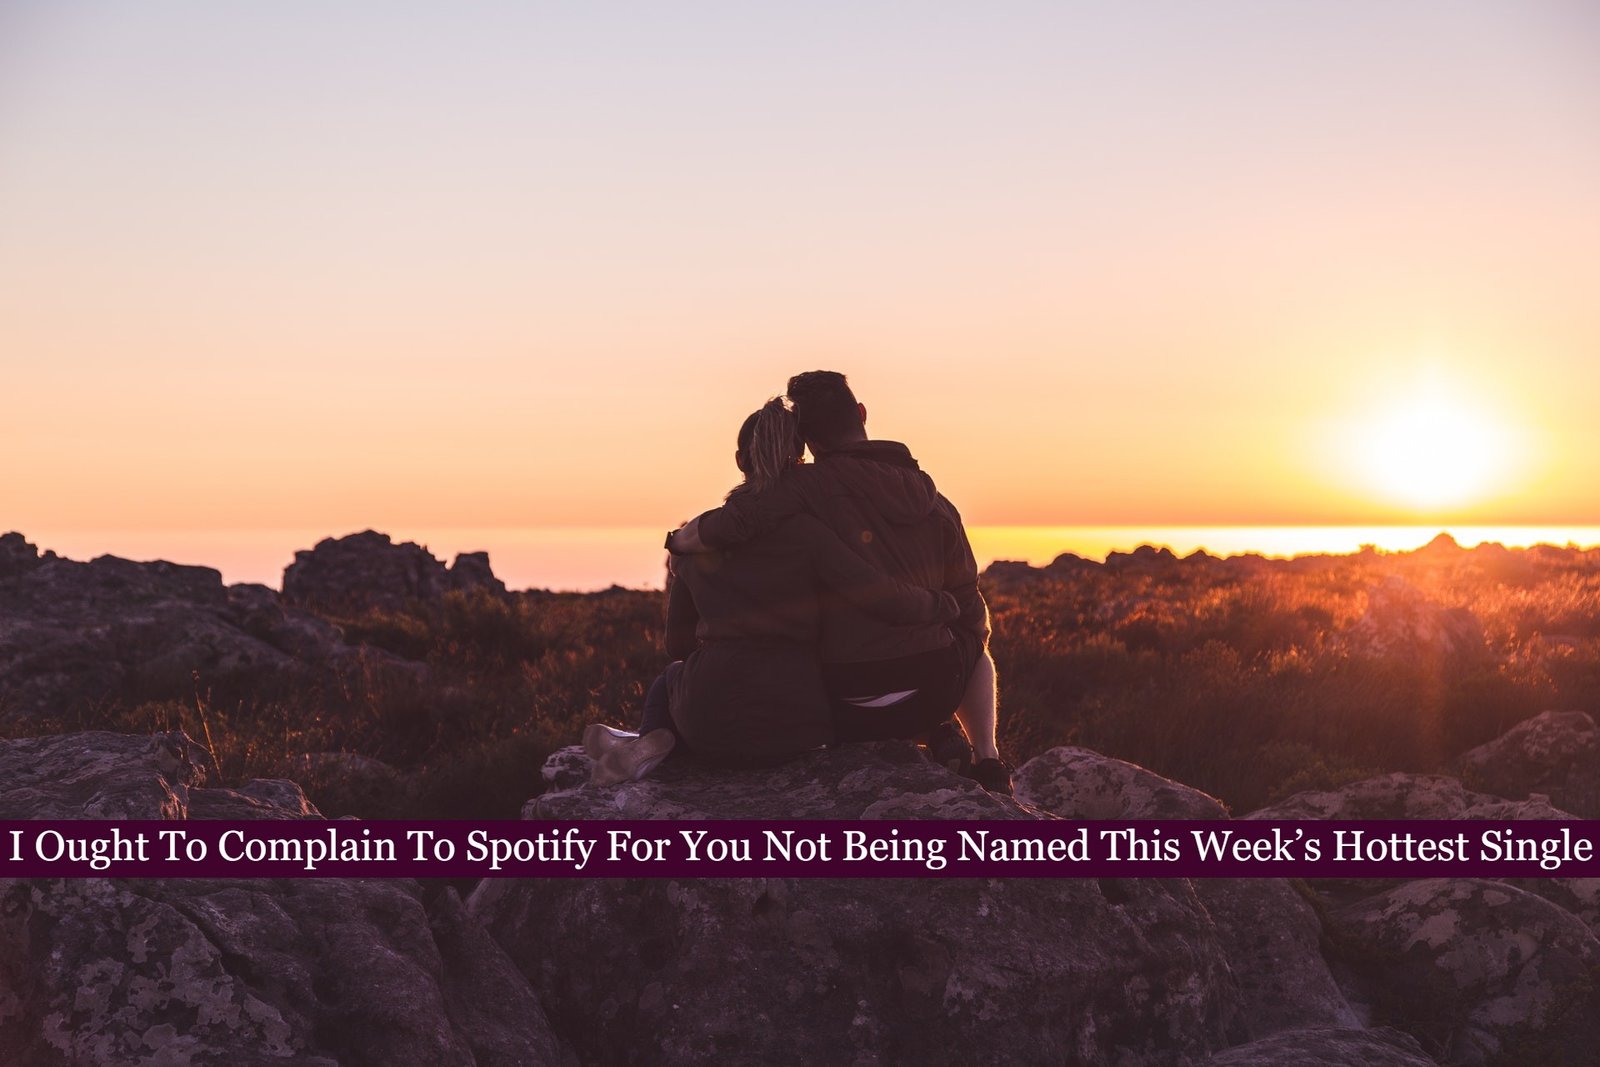 I Ought To Complain To Spotify For You Not Being Named This Week’s Hottest Single